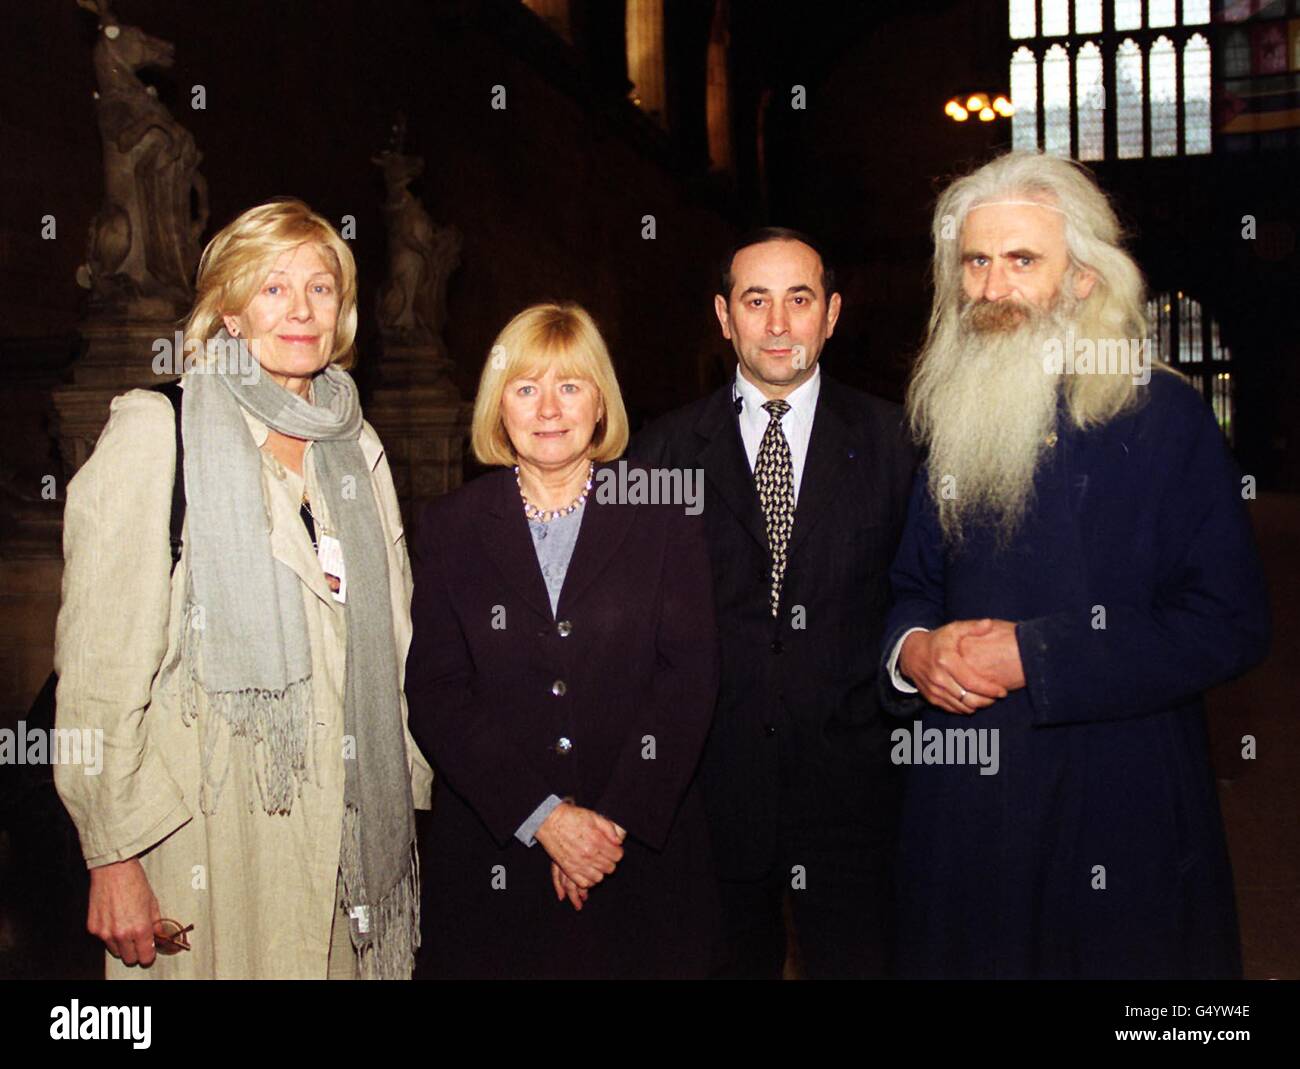 (l/r) Vanessa Redgrave, Ann Clwyd MP, Akhiad Idigov and Victor Popkov, in Westminster Hall. Anne Clywd, Chair of the Parliamentary Human Rights Group, has called for an international war crimes tribunal to be set up to examine allegations of atrocities in Chechnya. * Akhiad Idigov is Chairman of the Foreign Affairs Committee, and Victor Popkov is a member of the congregation of the Church of the Dormition Moscow, and also the director of the 'Omega' humanitarian aid organisation. Stock Photo